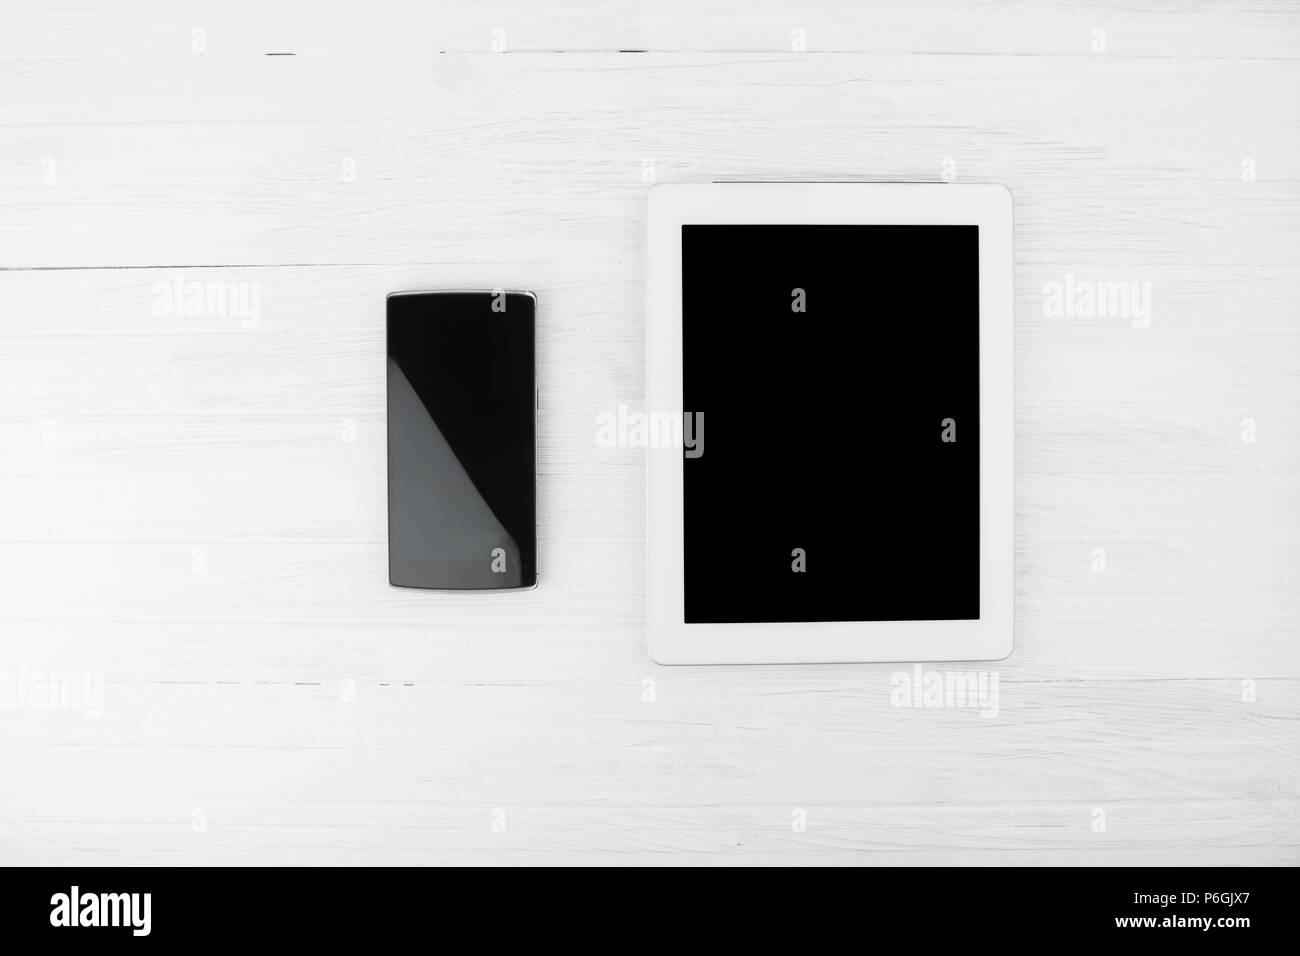 Big Black Empty Screen Smart Tablet Device Next To Smart Phone On White Wooden Background Top View Stock Photo